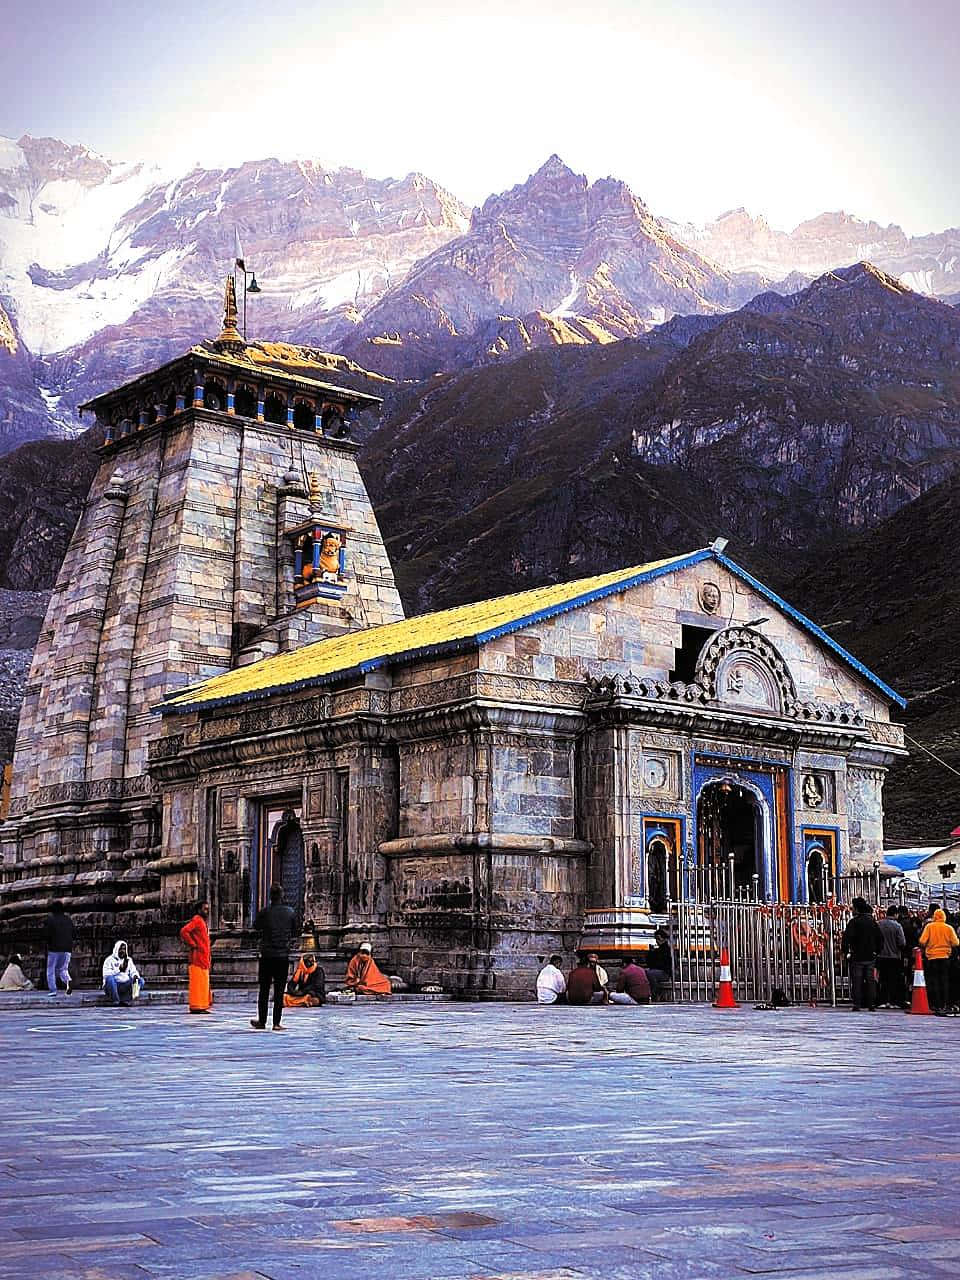 The breathtaking beauty of the Kedarnath Temple in India